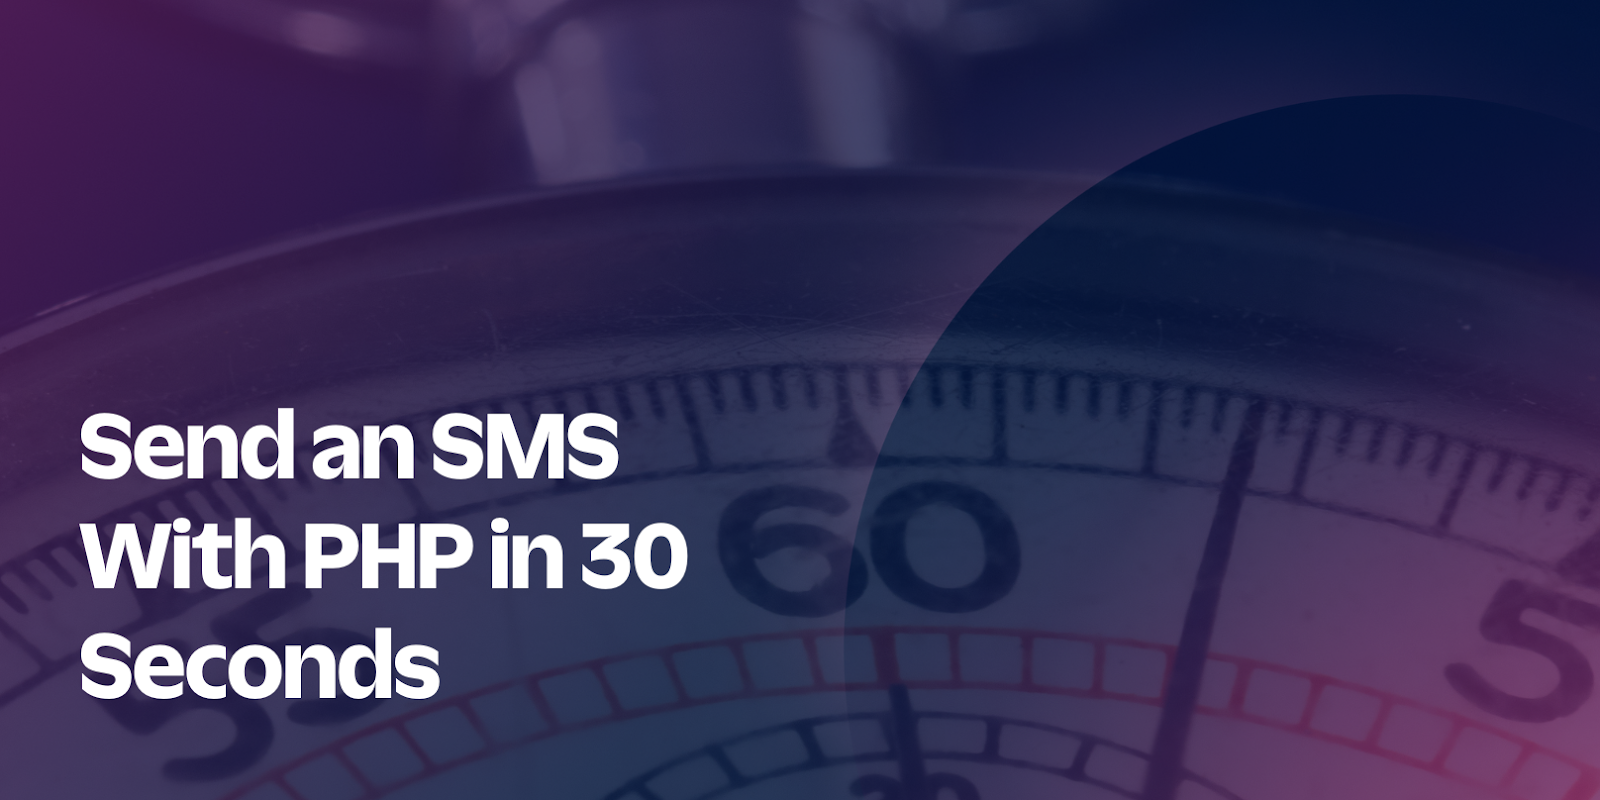 Send an SMS With PHP in 30 Seconds